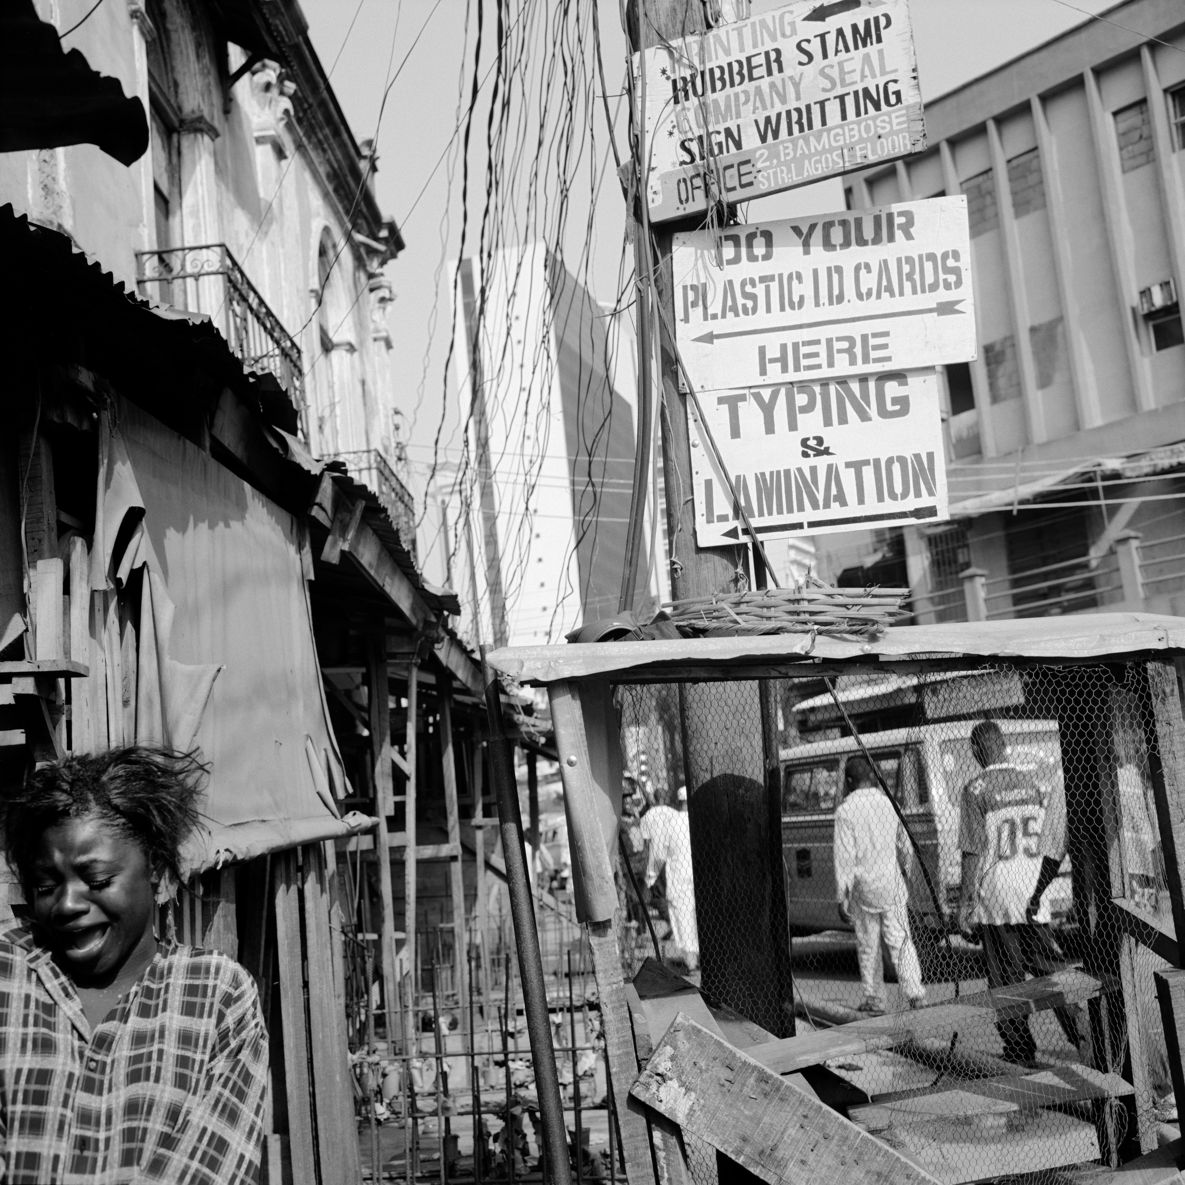 Square black and white photograph: View of various house facades with a street running between them and people walking alongside. An electricity pylon can be seen in the center of the picture, to which billboards with inscriptions such as “Typing & Lamination” are attached. In the front, left-hand part of the photograph, a female figure can be seen with her mouth wide open and her eyes downcast.